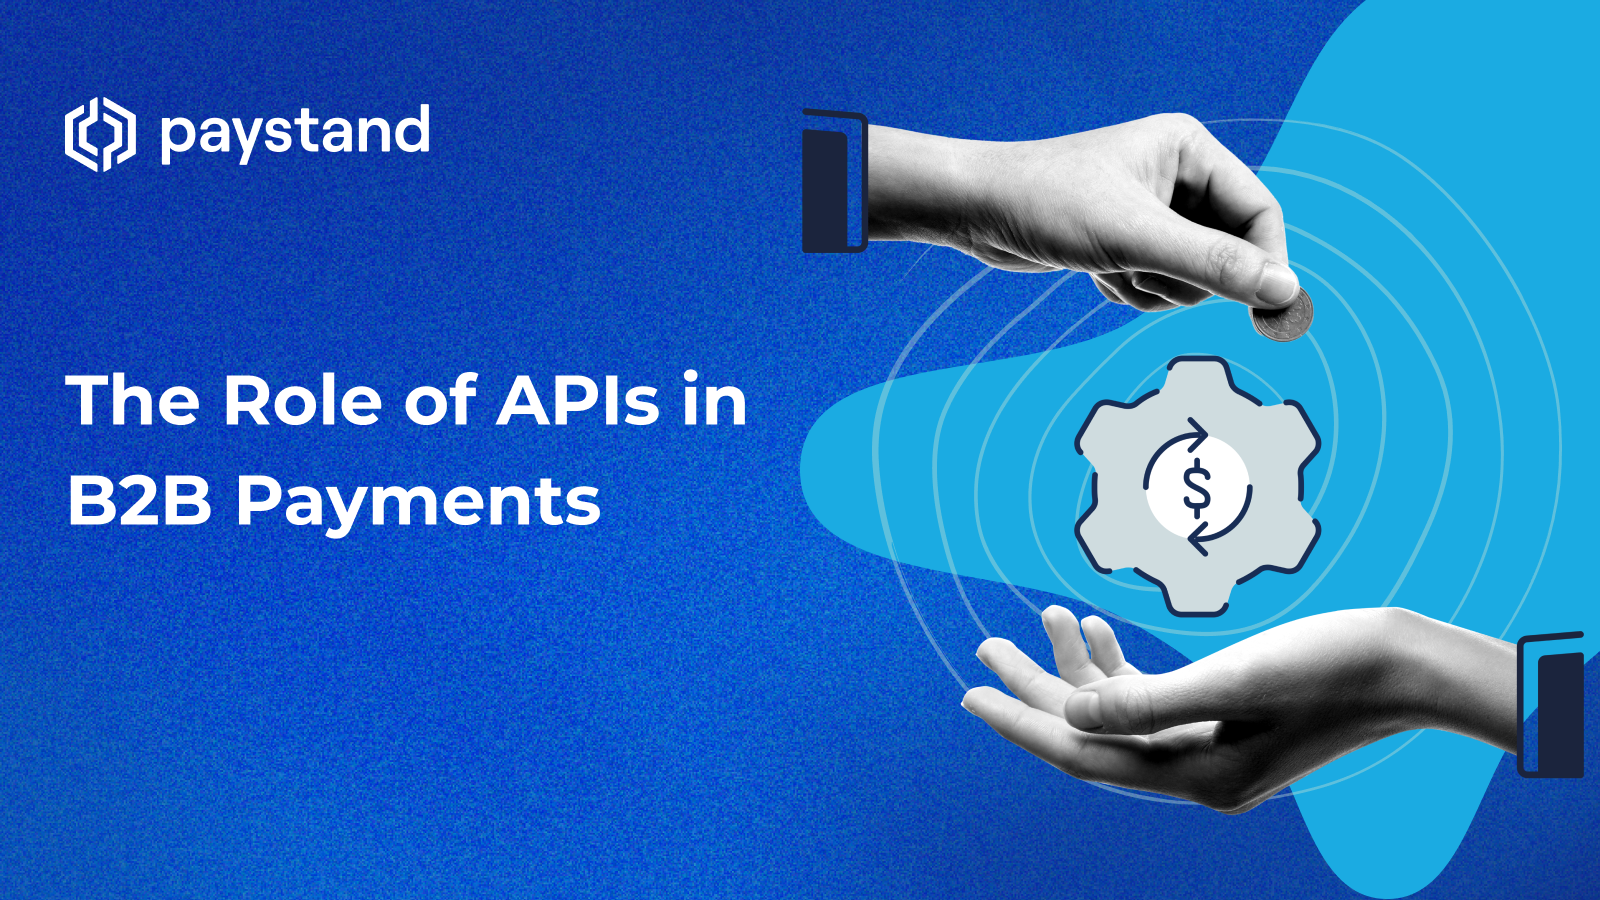 The Role of APIs in B2B Payments